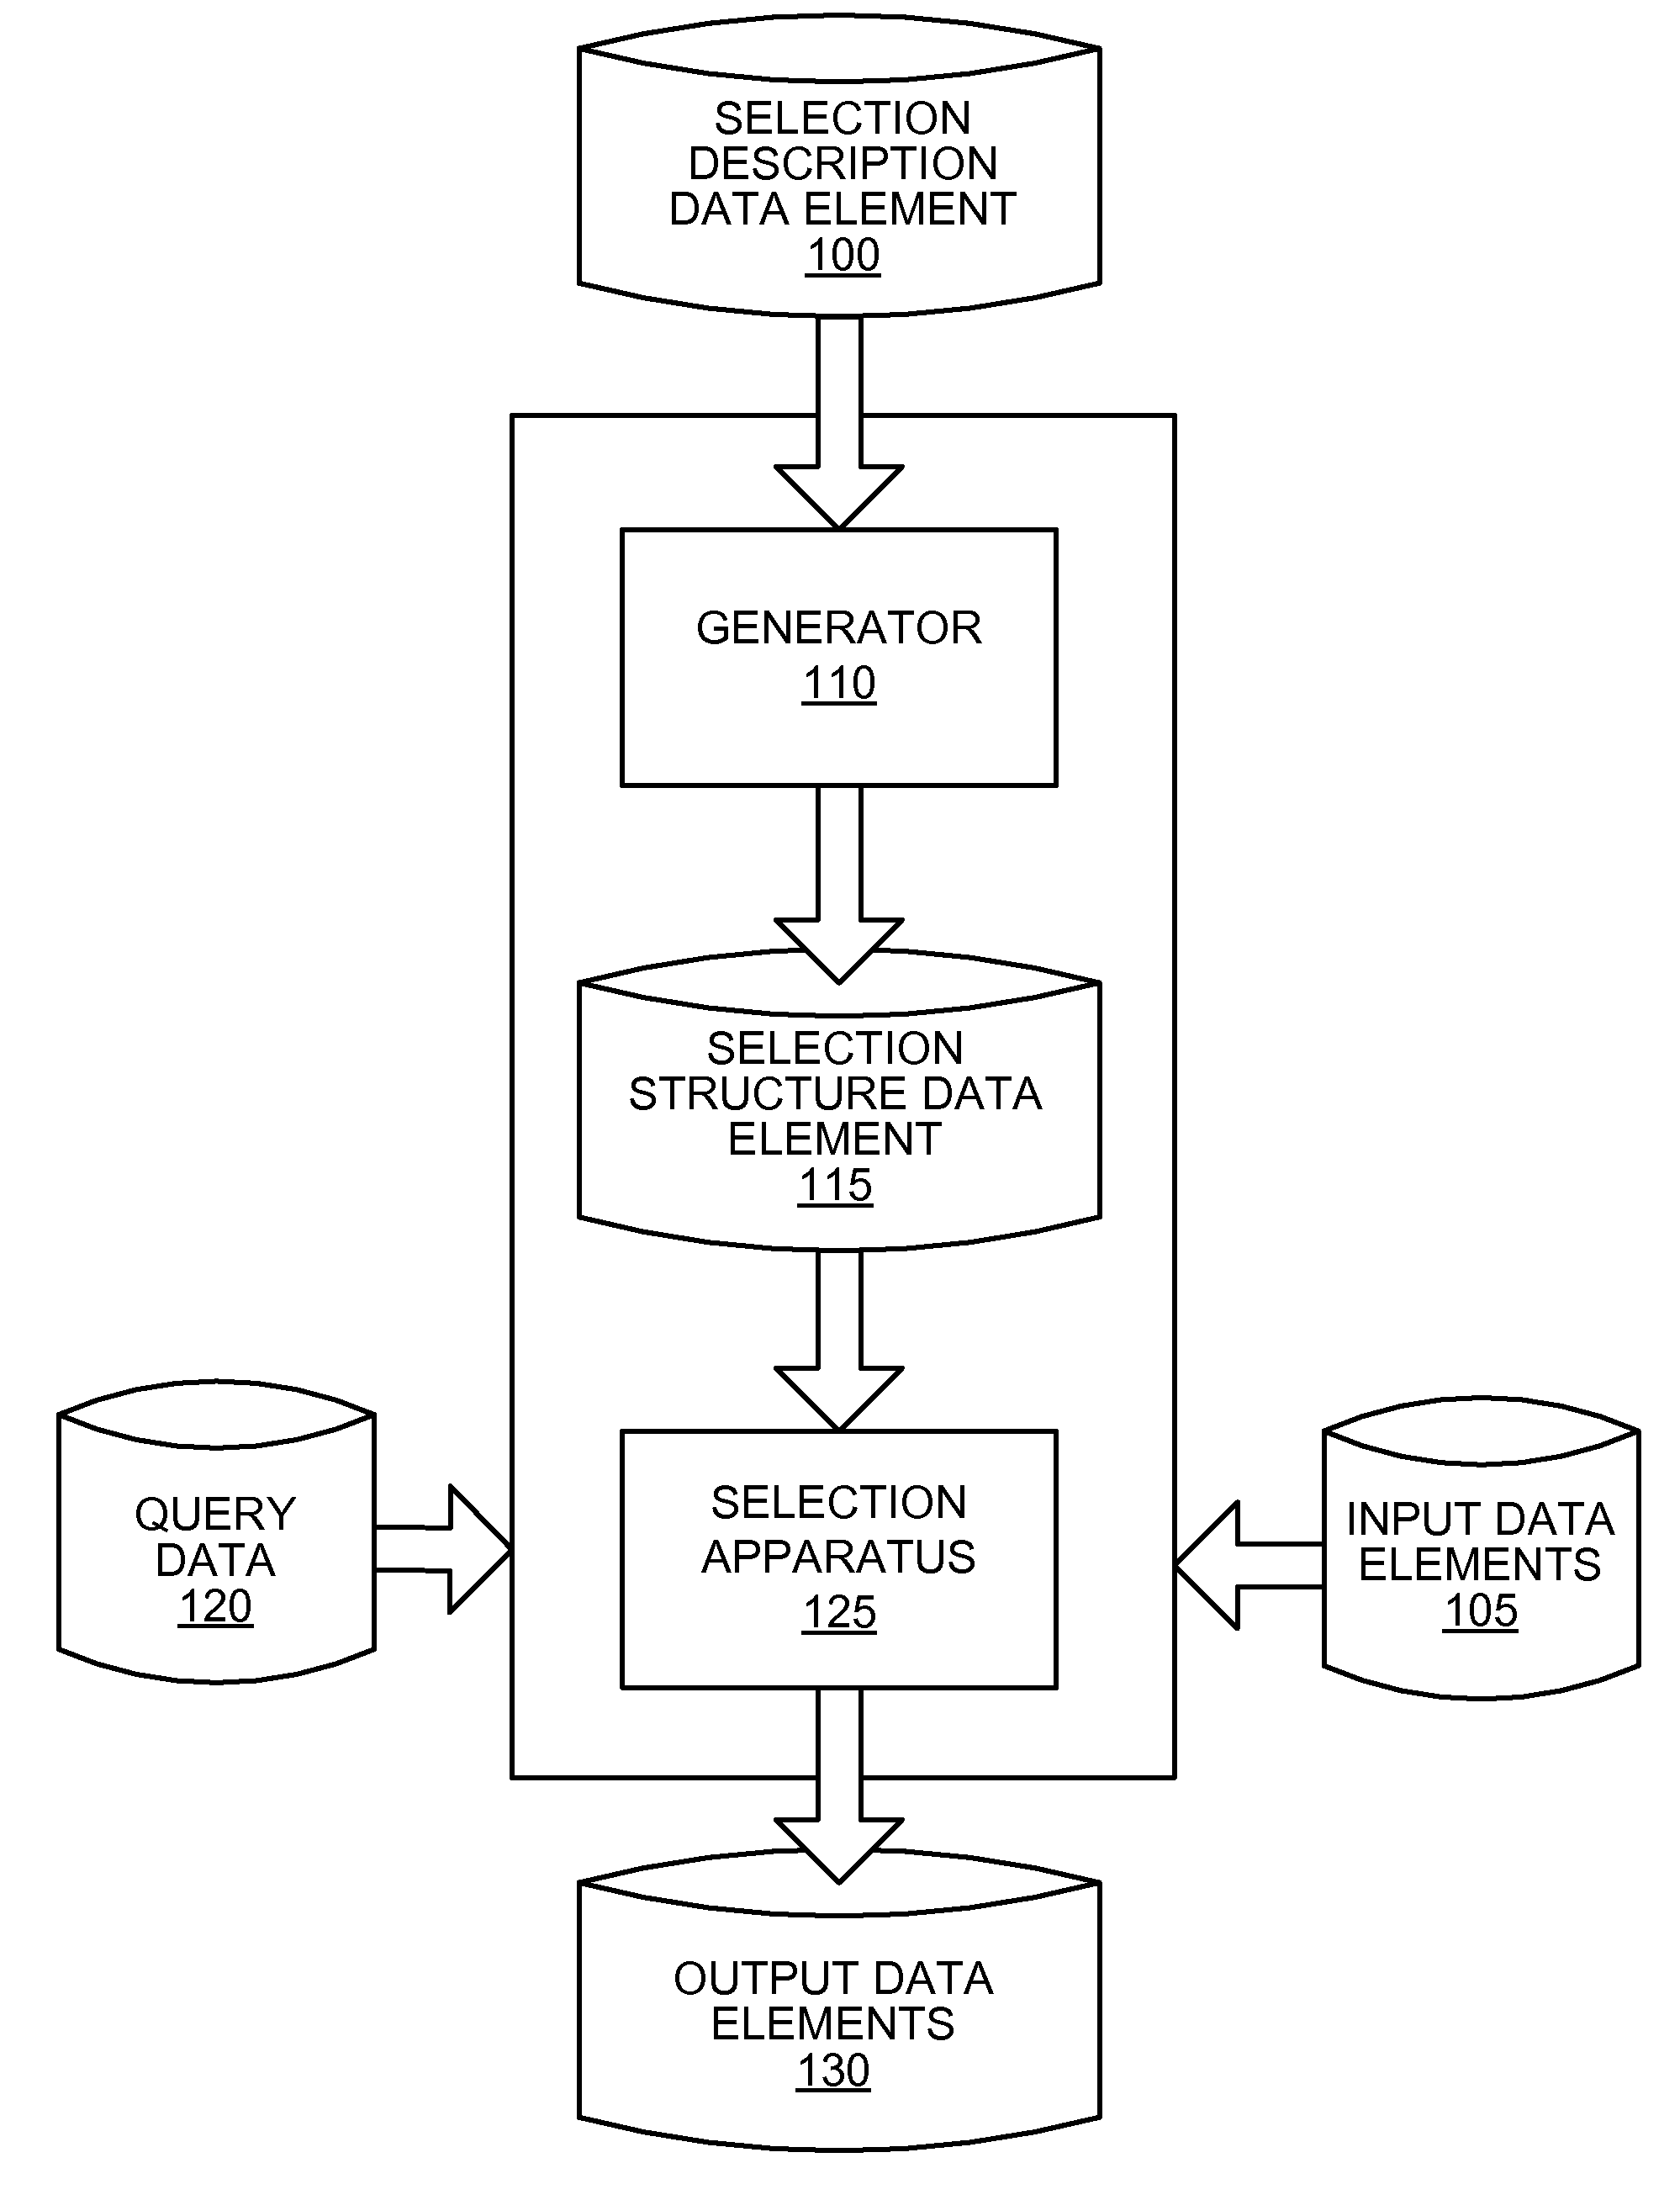 Device for generating selection structures, for making selections according to selection structures, and for creating selection descriptions